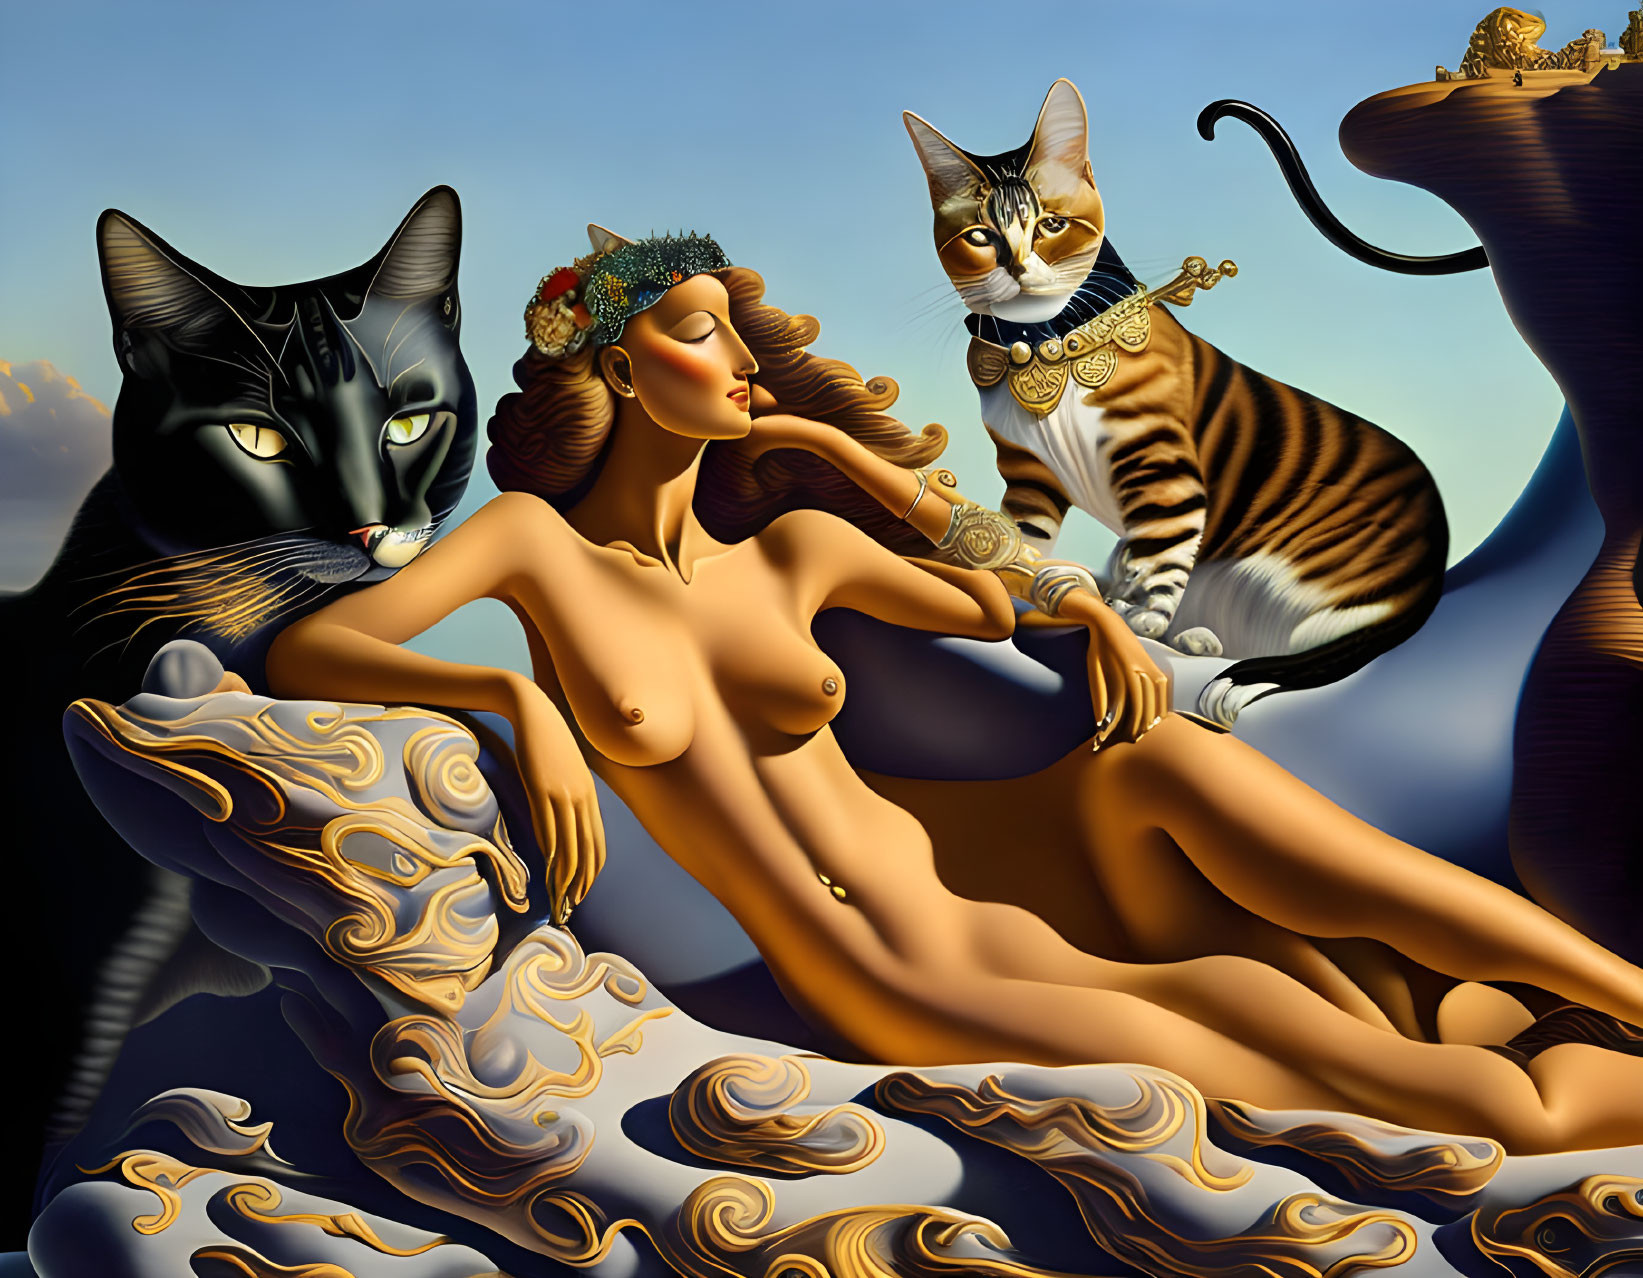 Lady and her cats 